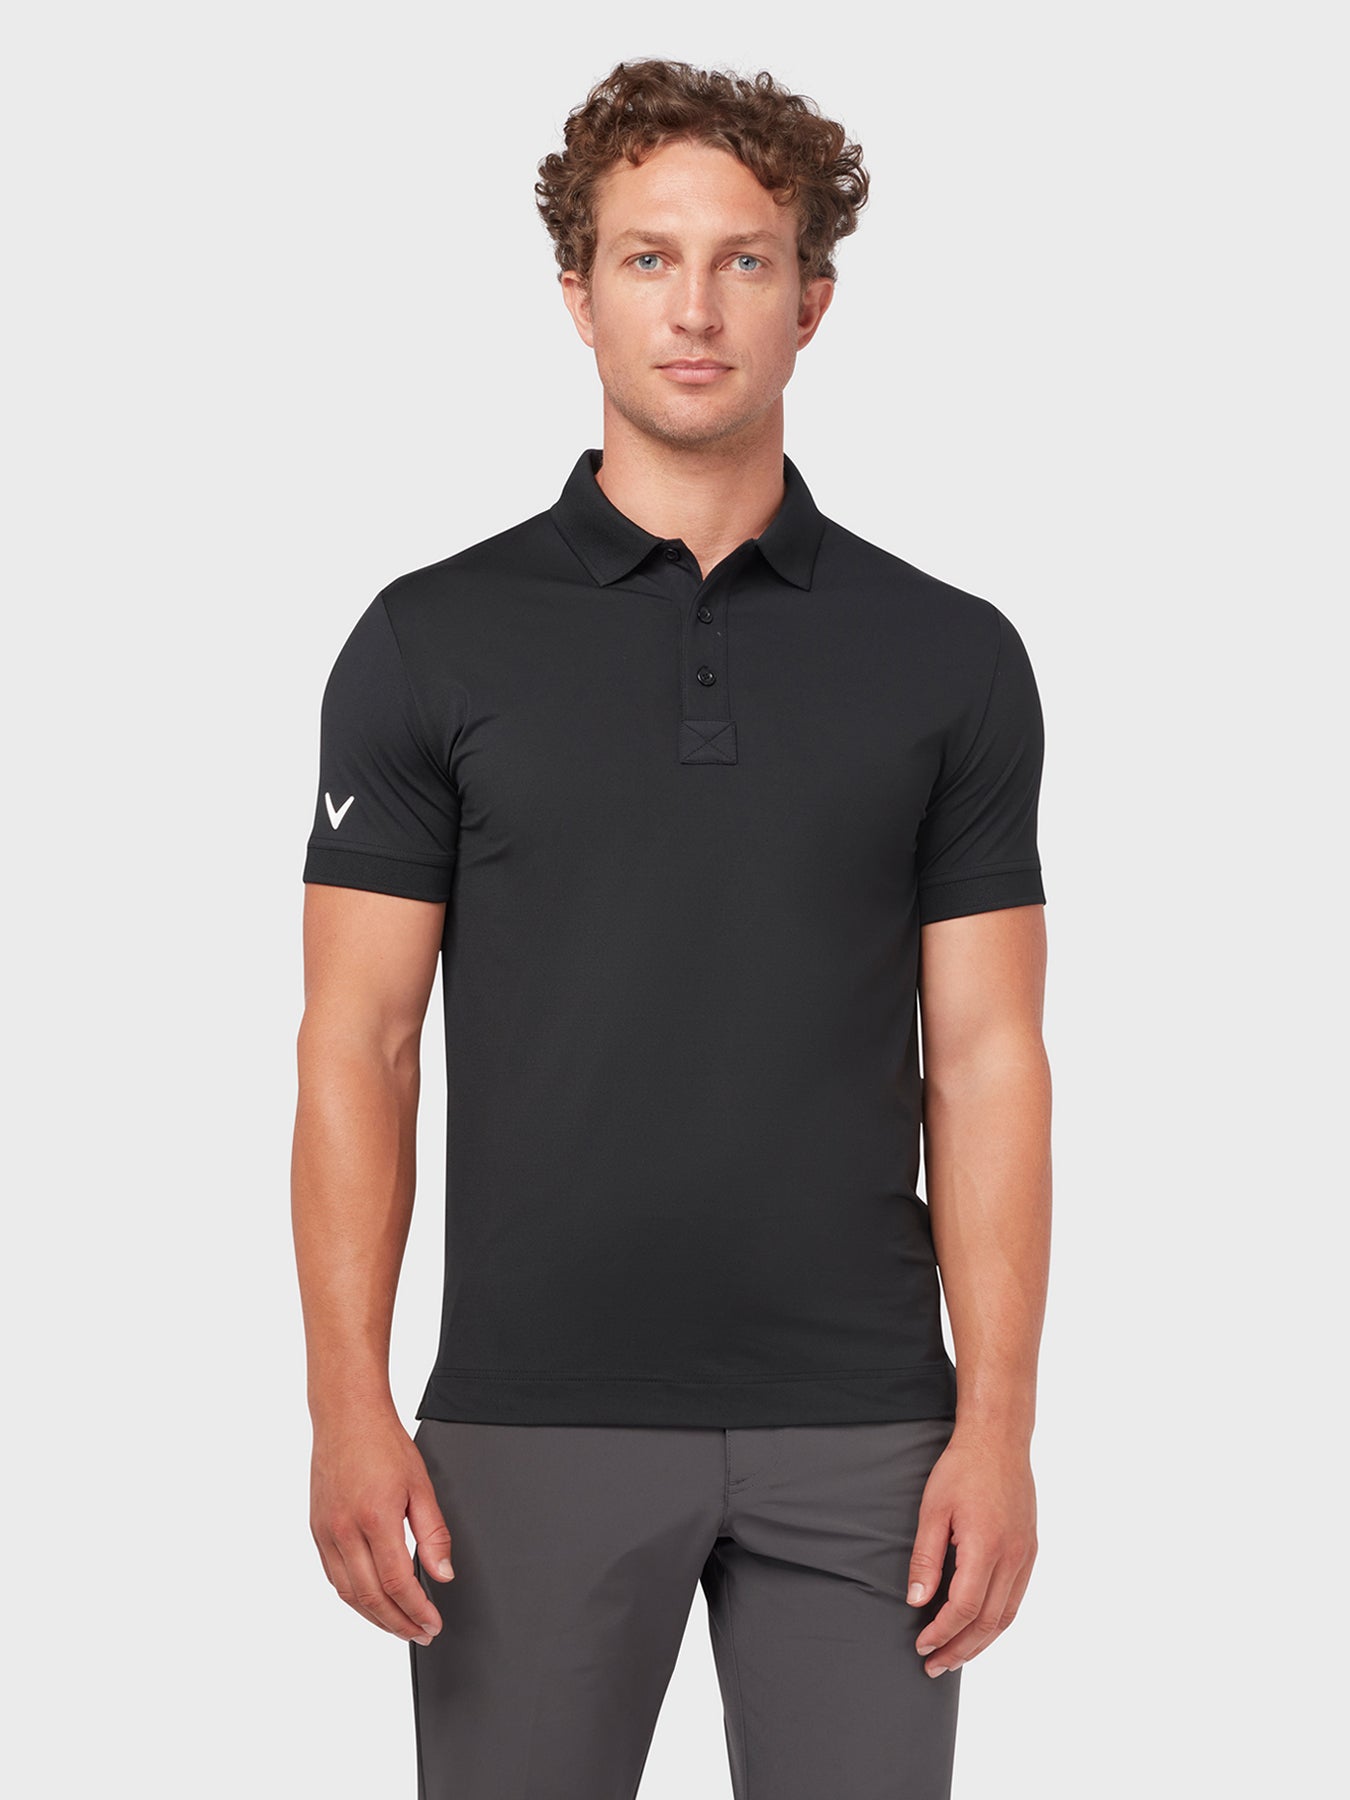 View X Series Solid Ribbed Polo In Caviar Caviar XL information